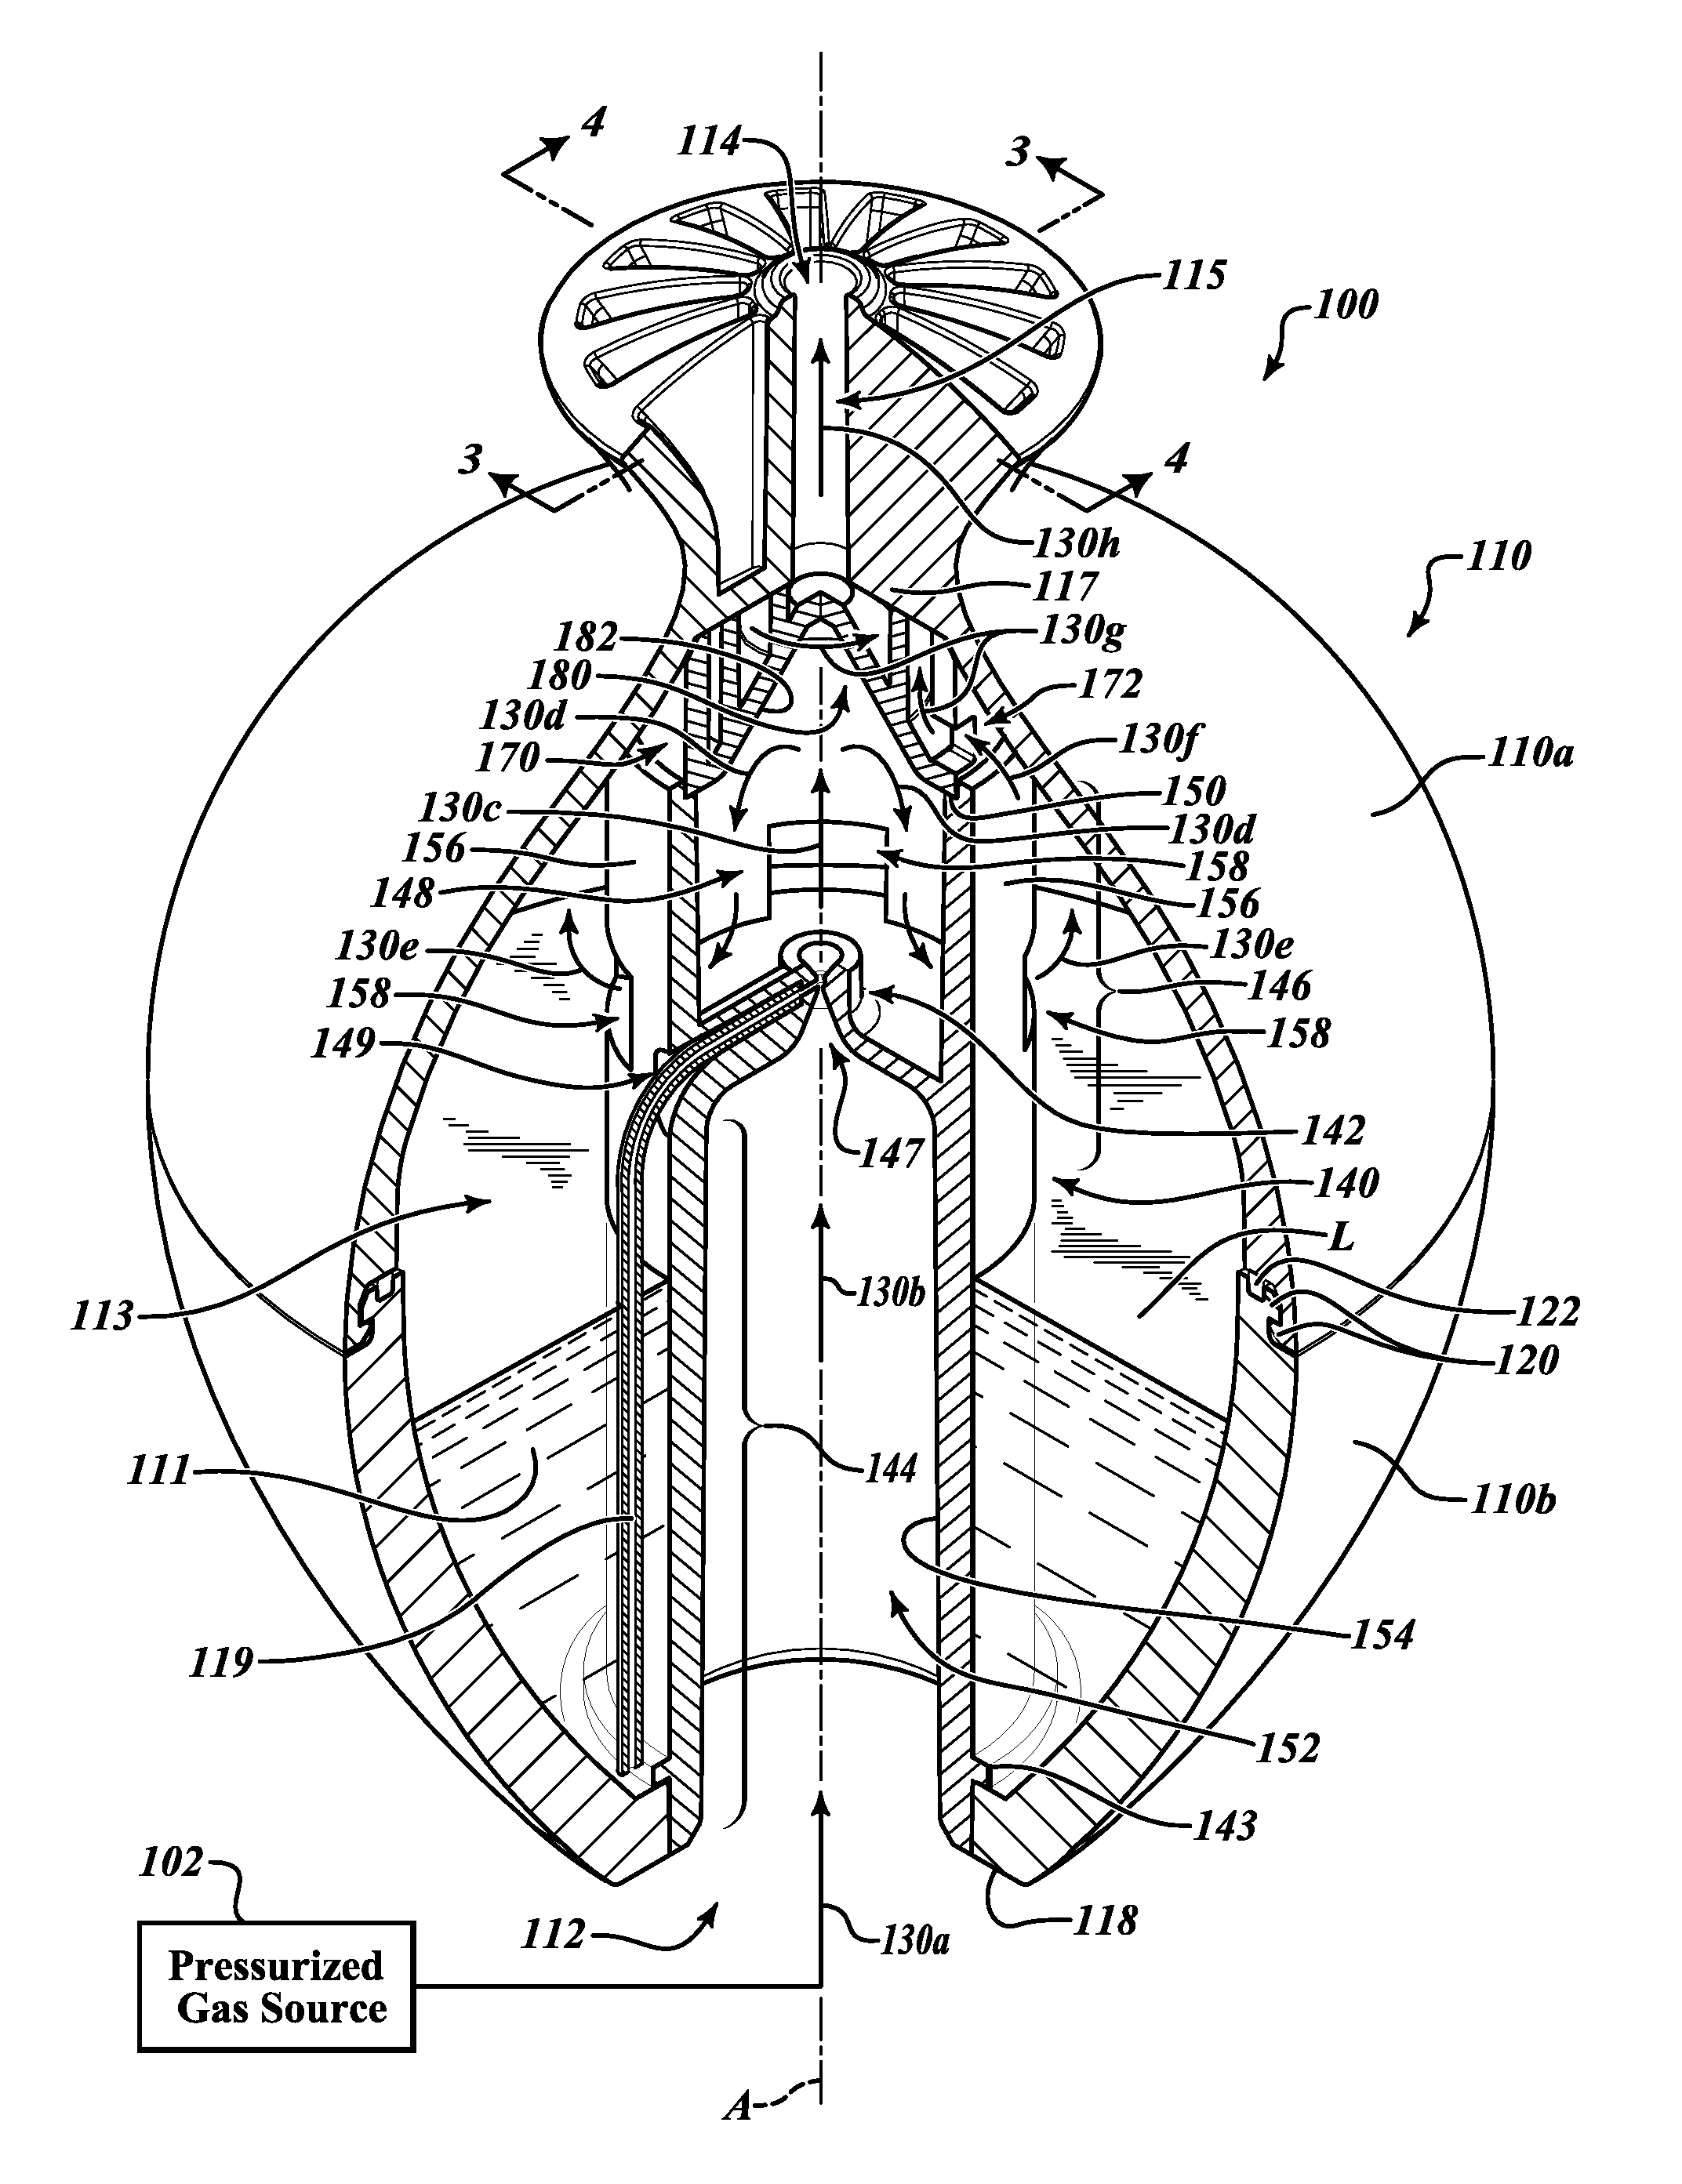 Removable cartridge for liquid diffusion device and cartridge insert thereof